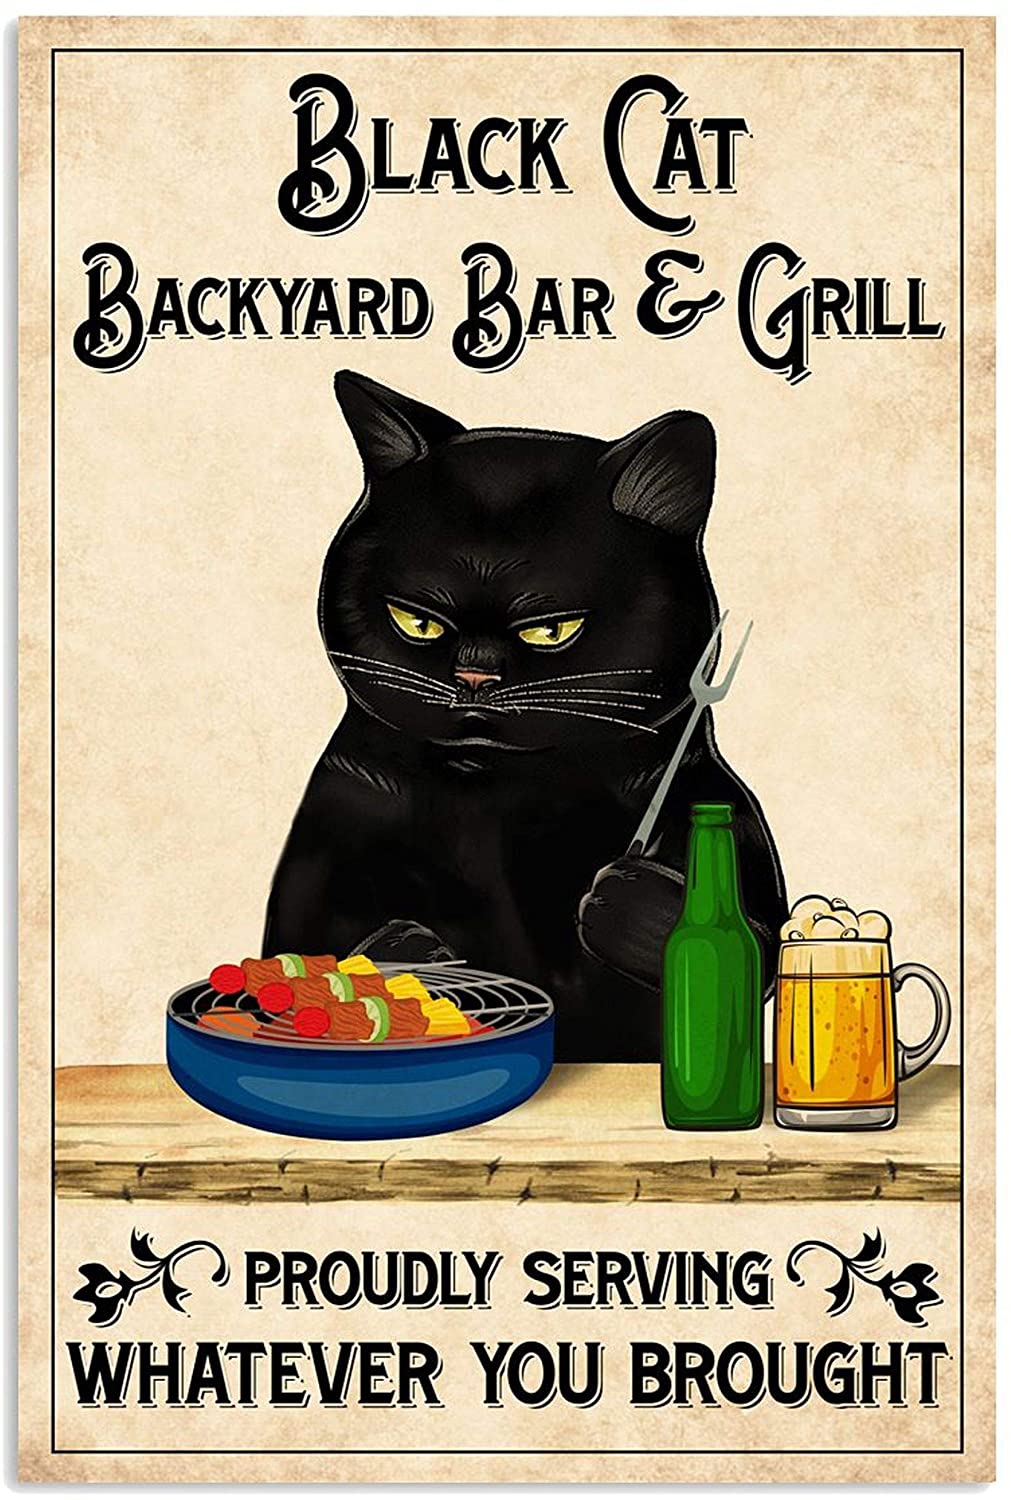 ANDIEZ Black Cat Backyard Bar and Grill Proudly Serving Whatever You Brought Poster